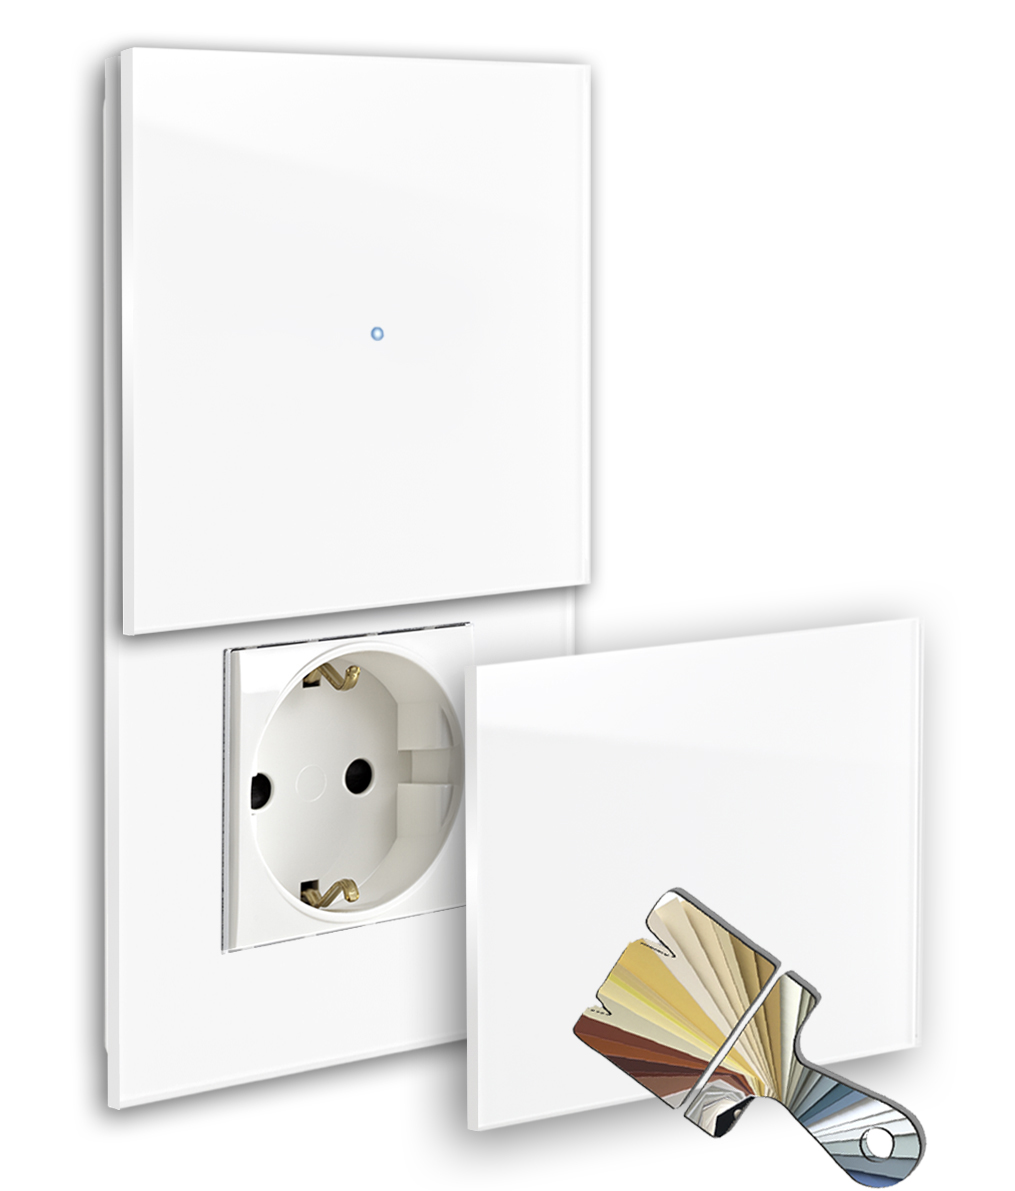 Touch Switch with Socket. Farrow Ball Colour. 230V. Glass Look. NOVA